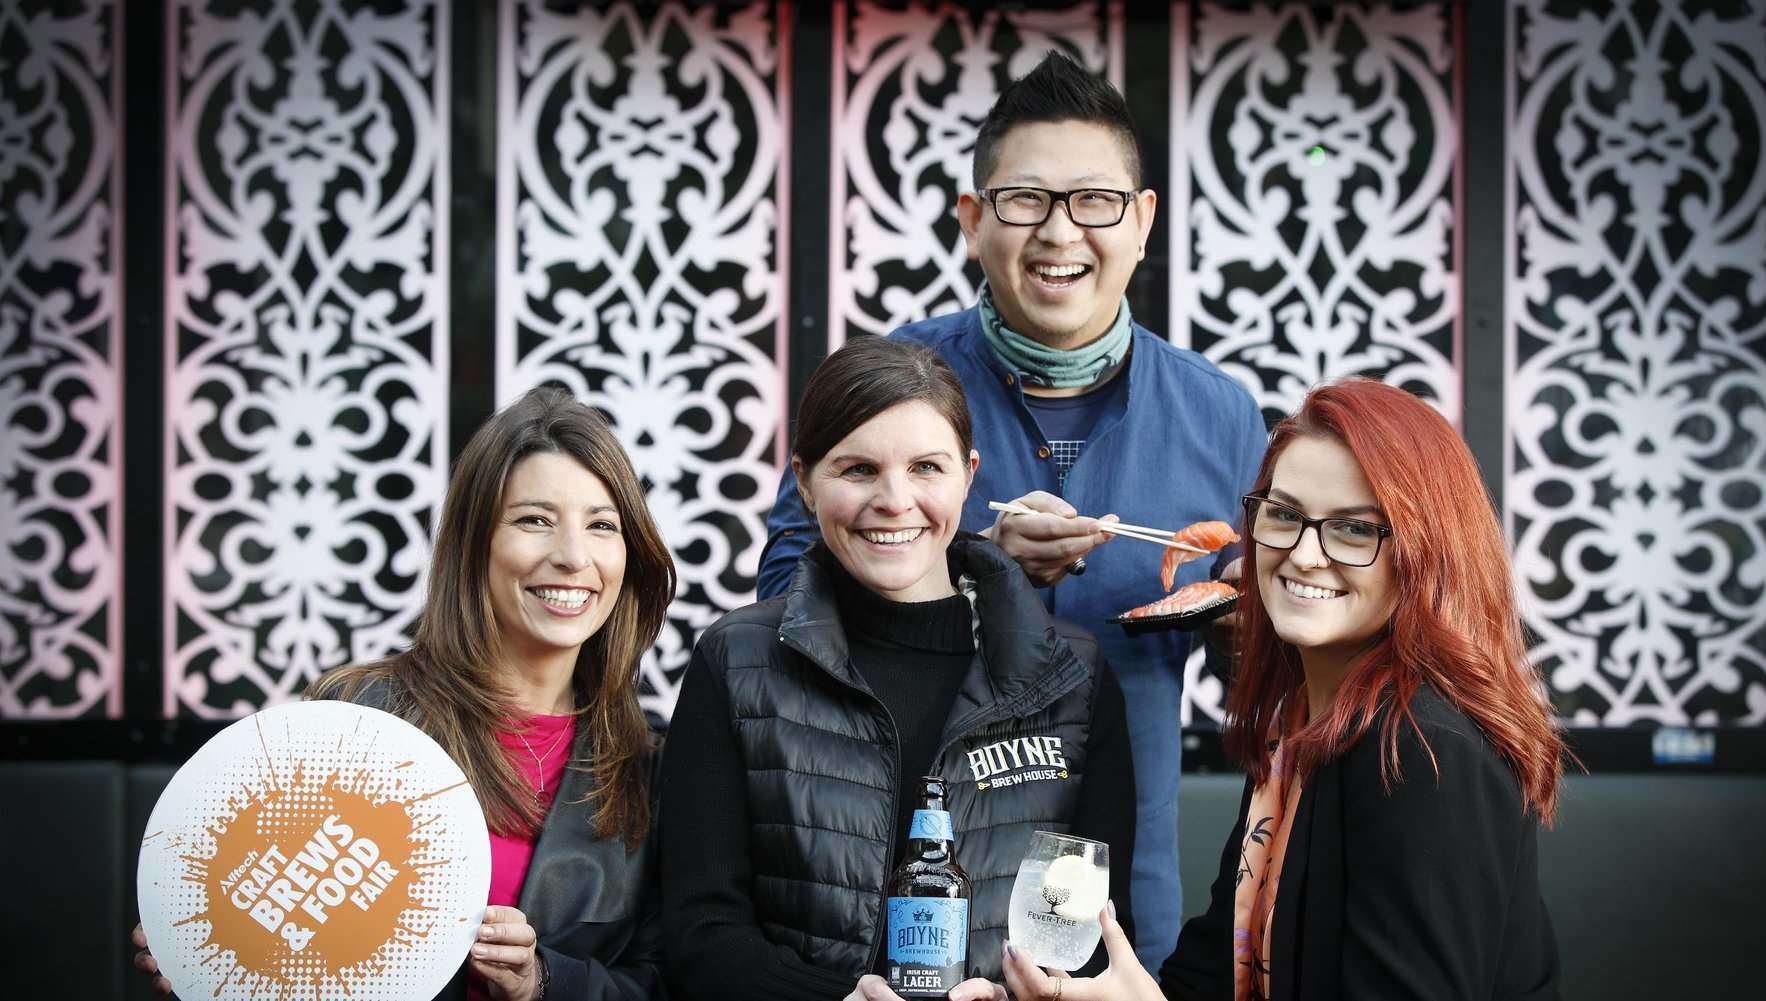 From left: Alltech Beverage Division Ireland's Natalia Lynch, Boyne Brewhouse's Sally-Anne Cooney, J2 Sushio's Jason Cheng and Fevertree's Laura Halligan are among 50 exhibitors announced for the Alltech Craft Brews and Food Fair in the Convention Centre Dublin from 8th -10th March, 2018.